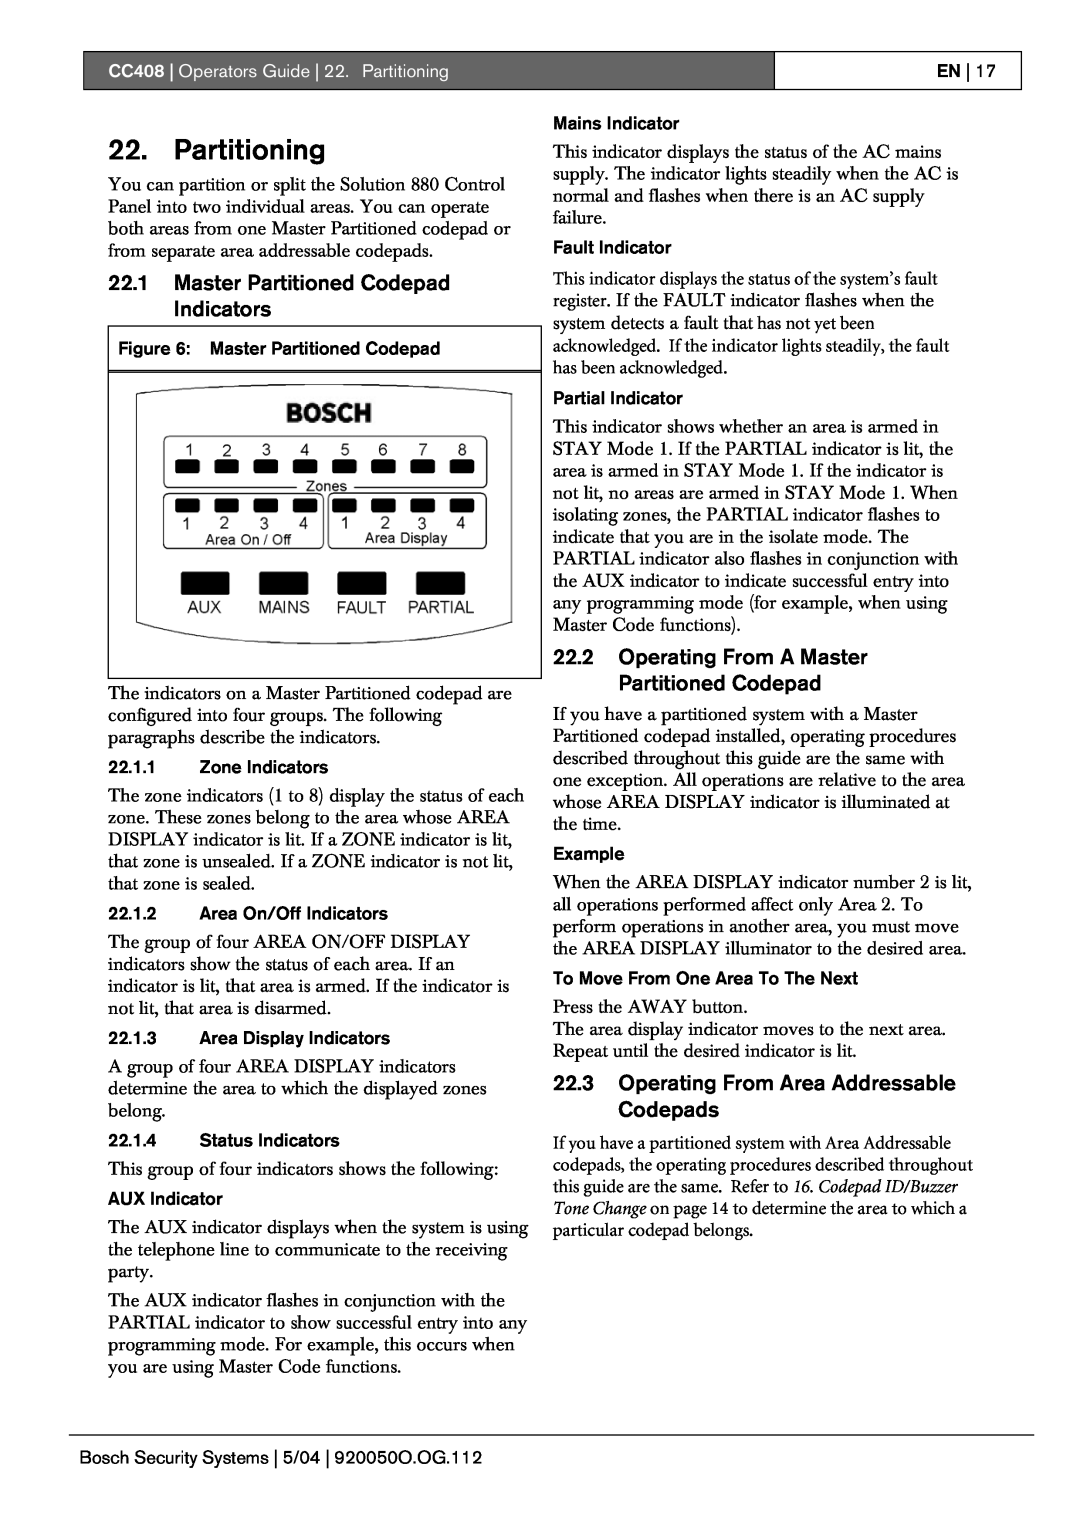 Bosch Appliances manual 22.1Master Partitioned Codepad Indicators, CC408 Operators Guide 22. Partitioning 